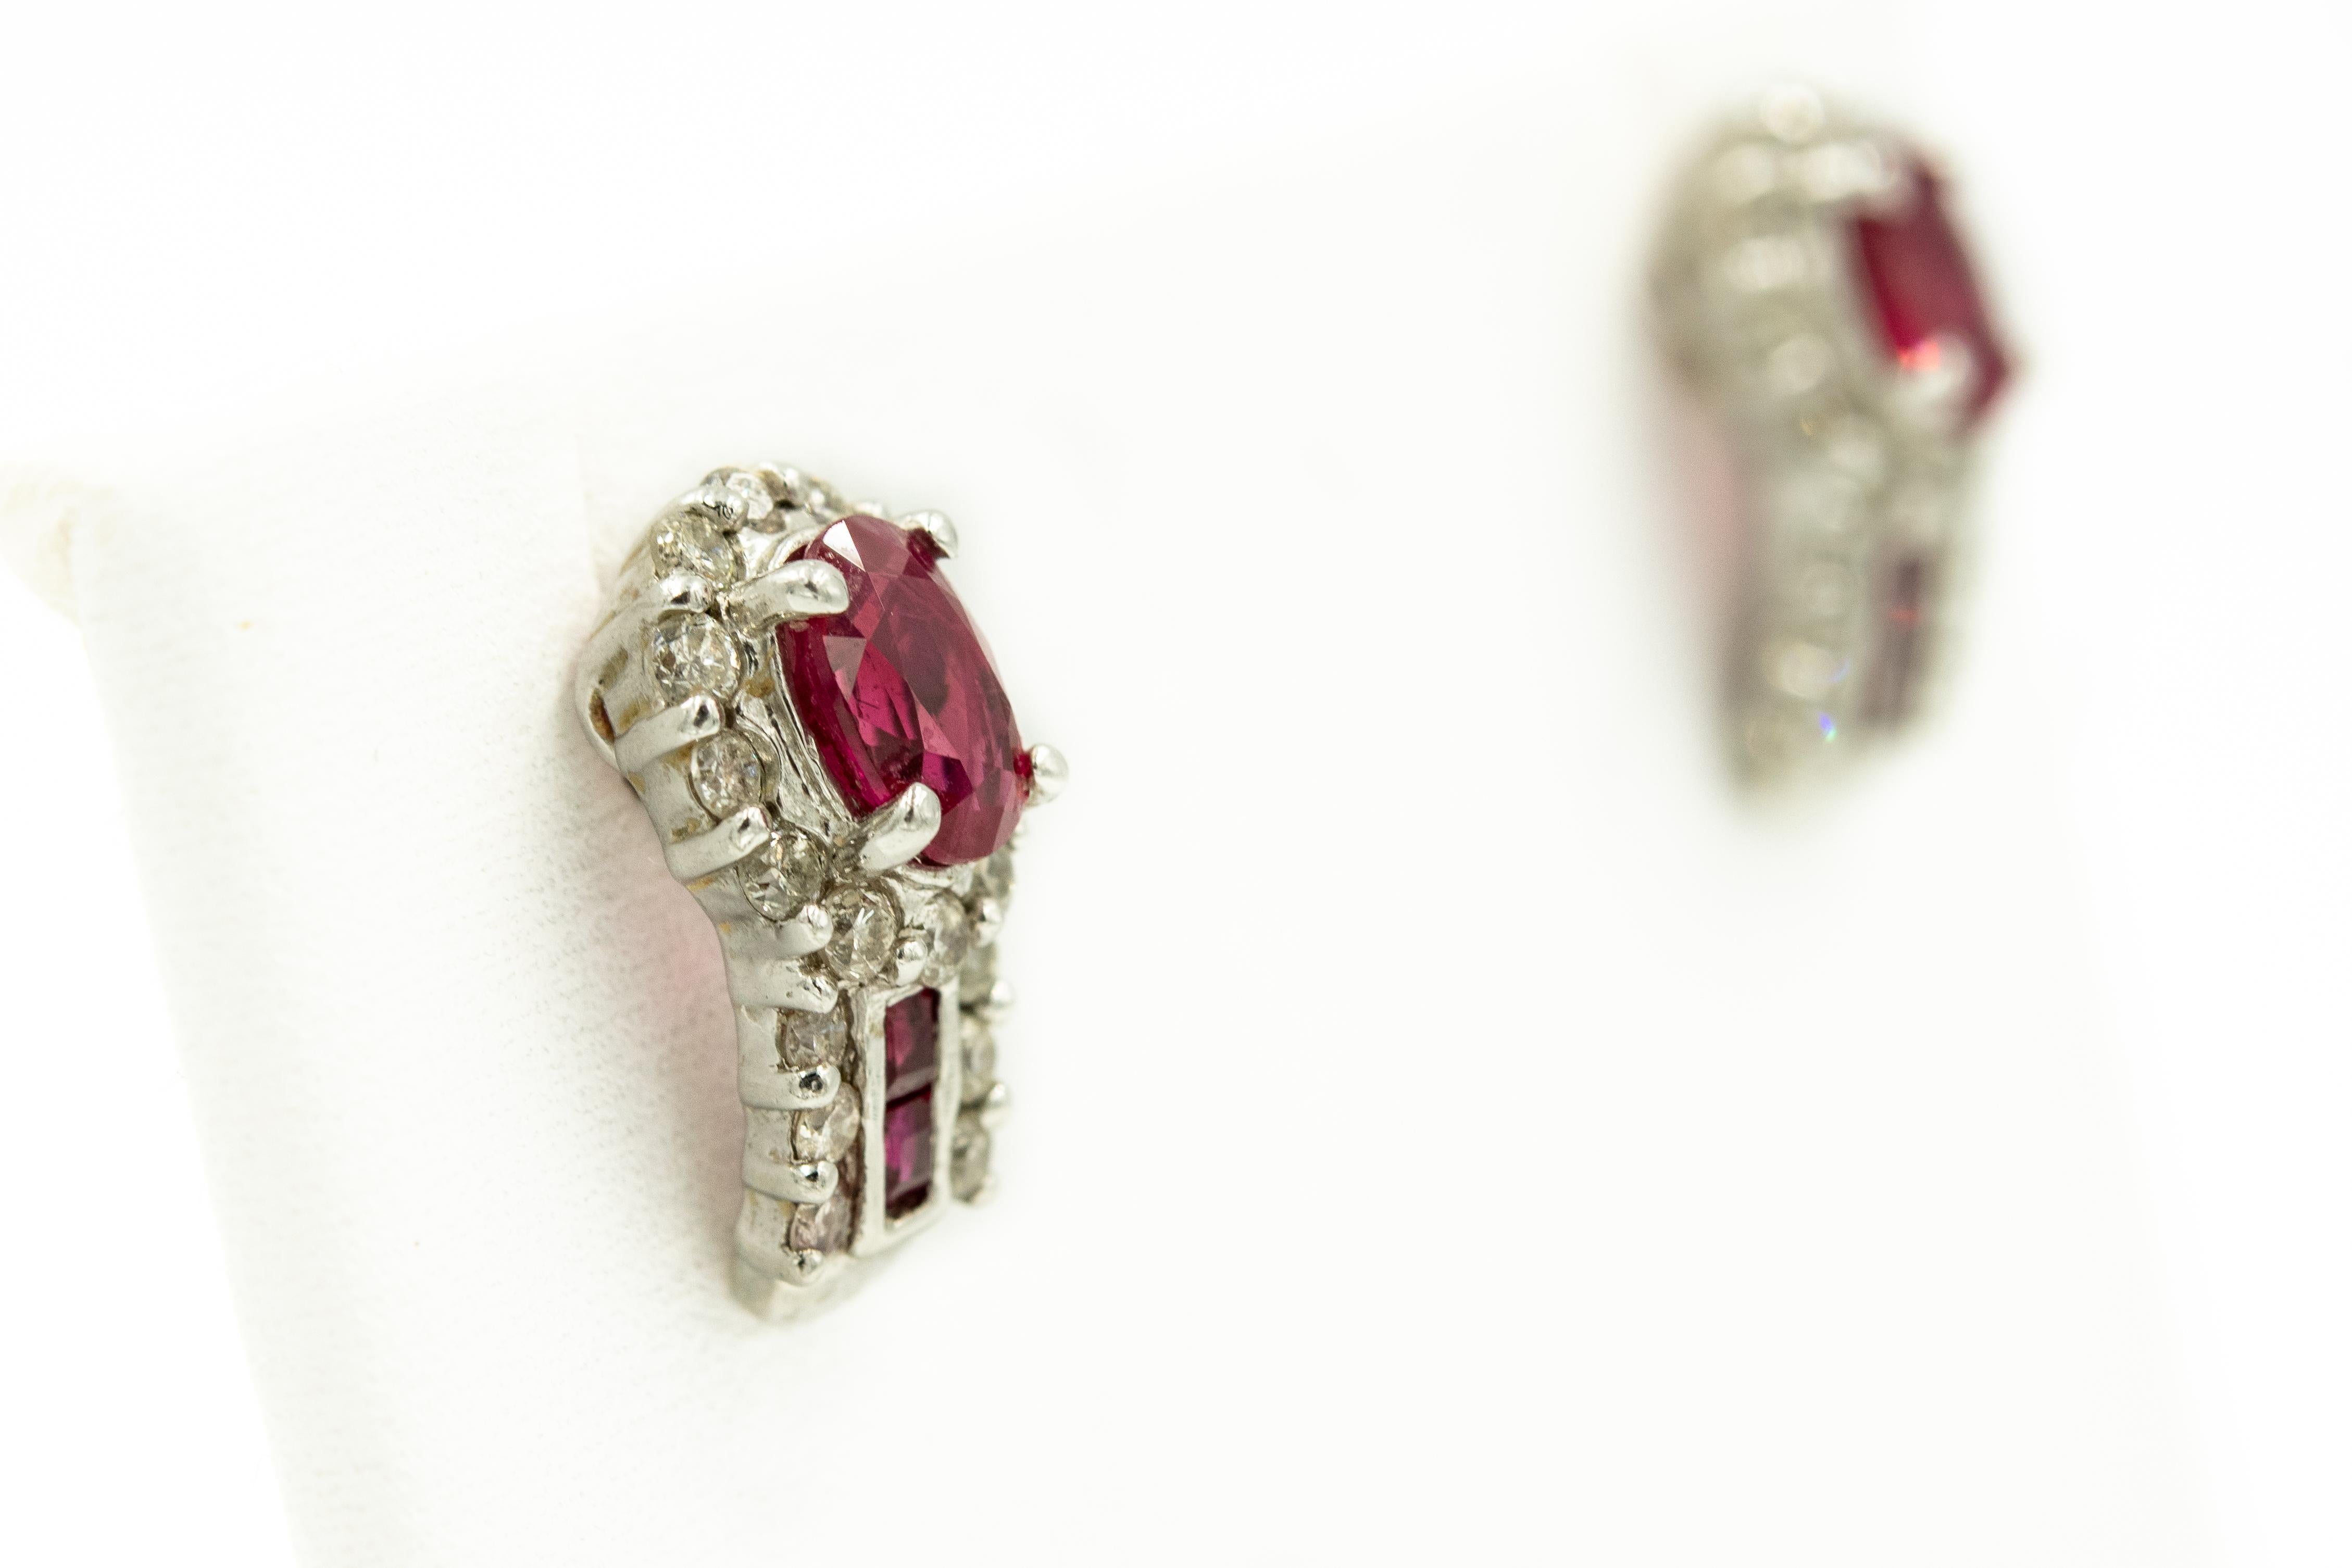 Small diamond and ruby white gold hoop type earrings featuring an oval ruby set in a diamond frame with a hopples area with channel set square rubies with three diamonds on either side.  The earrings are 18k white gold and the backs are 14k white